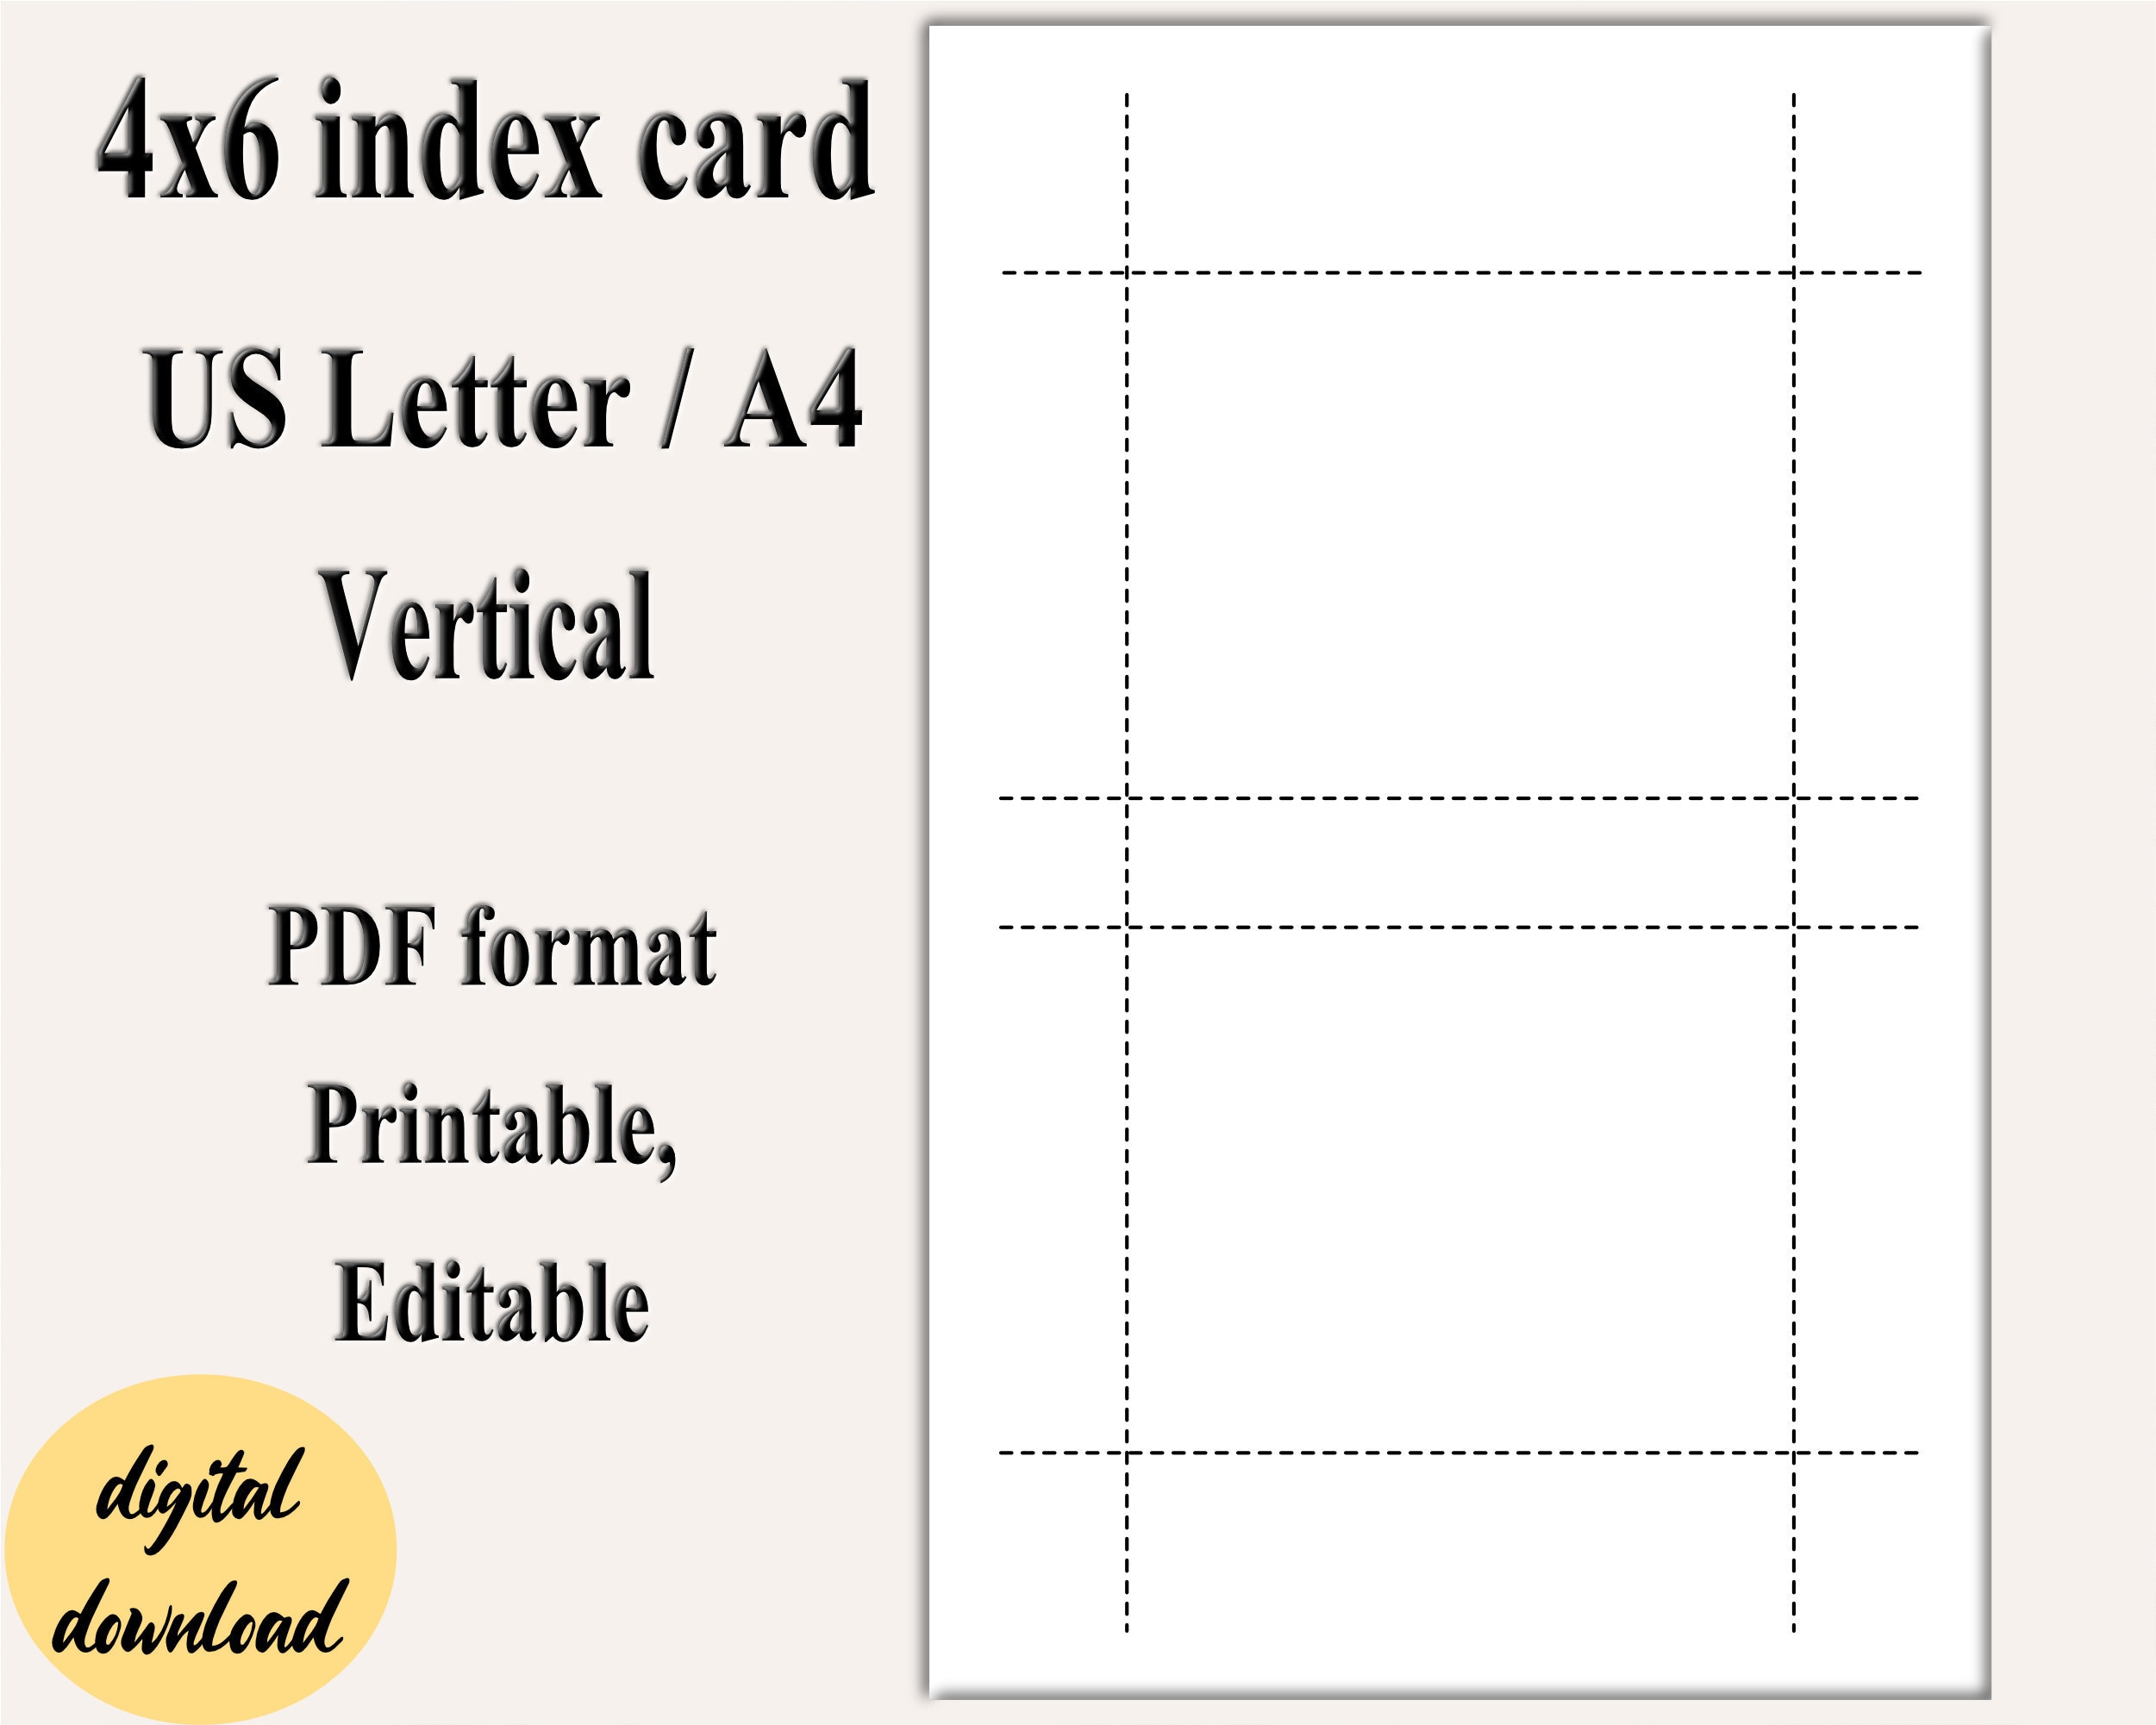 httpbahiaimplementos.comwp-contentuploads4x6-note-card-template-5x7-index- cards-template-expinmberp…